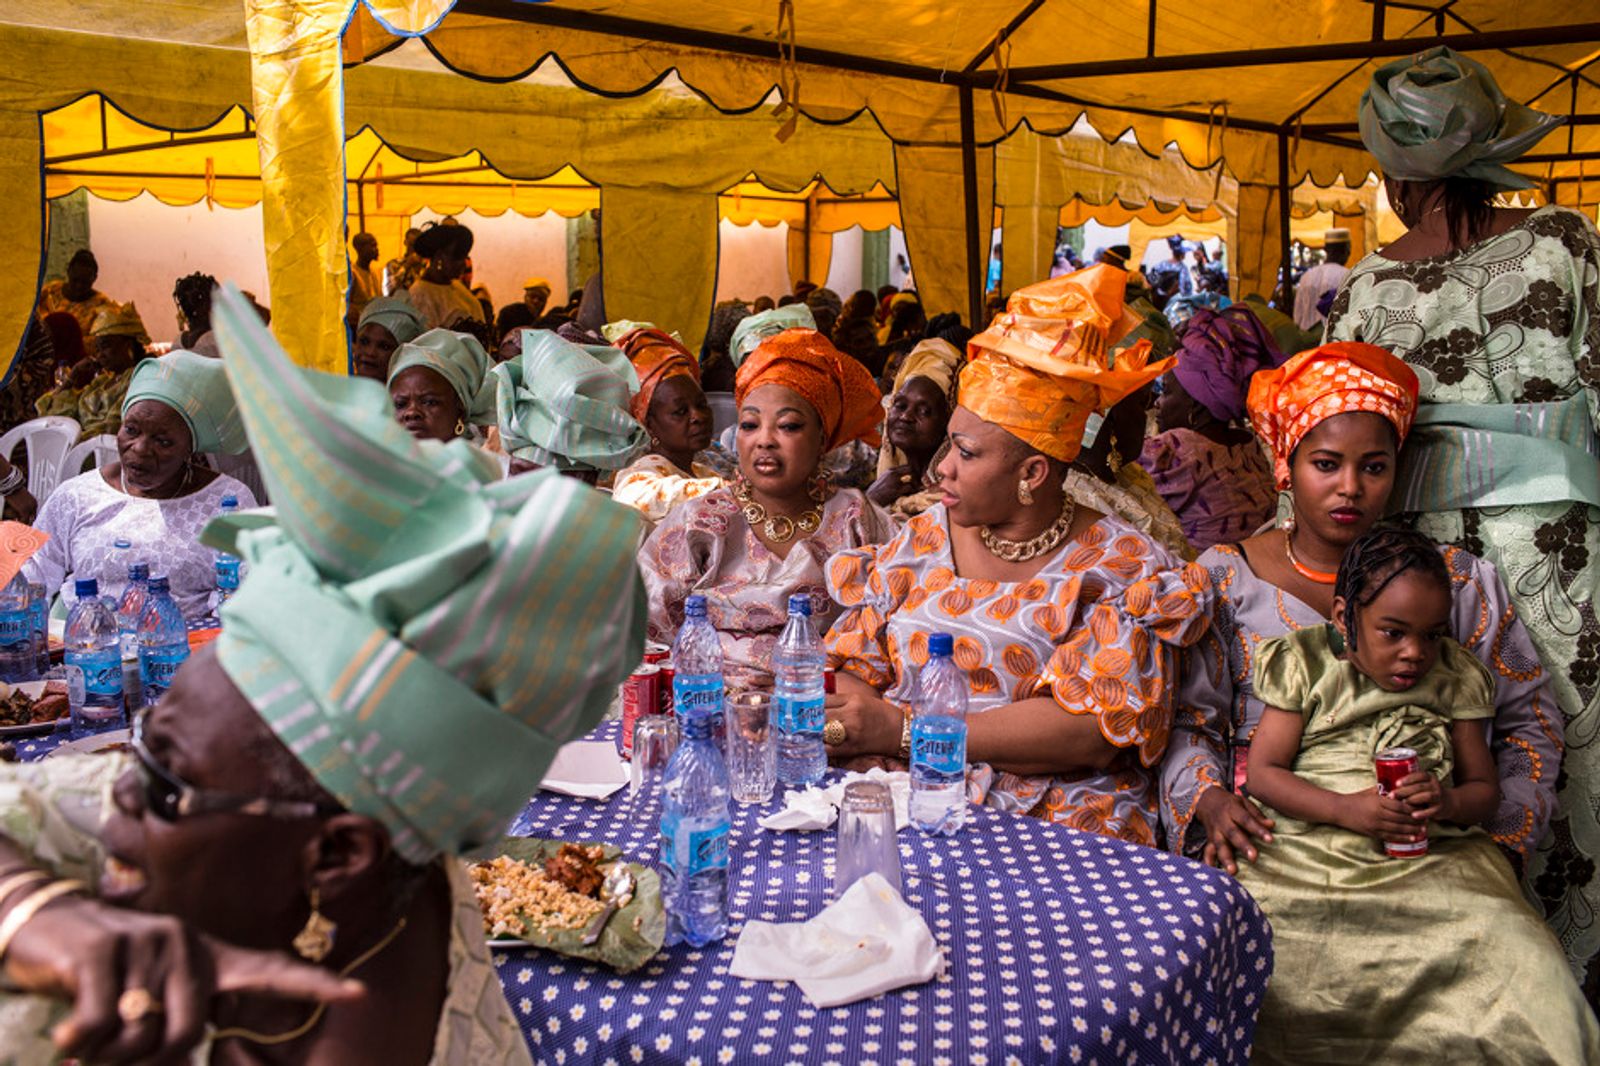 © Glenna Gordon - Image from the Naira Wedding: Marriage and Money in Nigeria  photography project